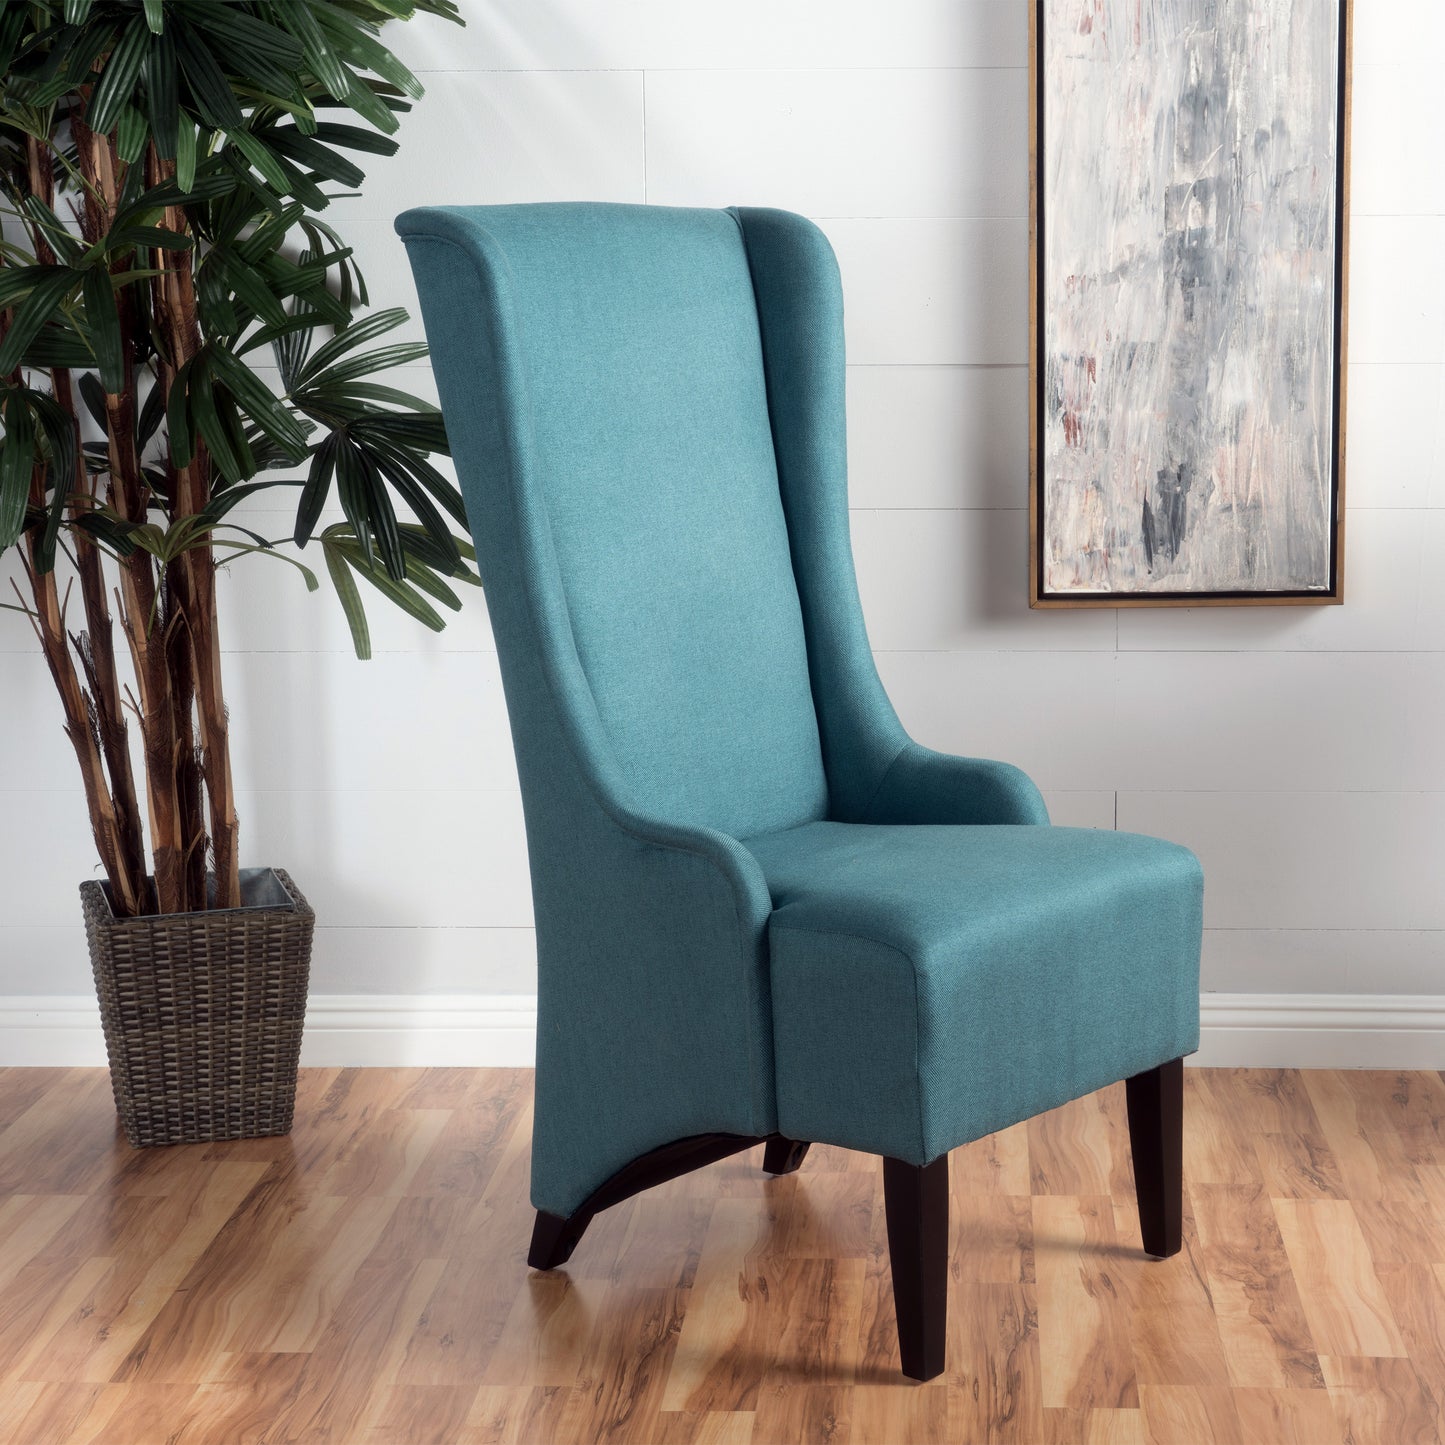 Sheldon Traditional Design High Back Fabric Dining Chair